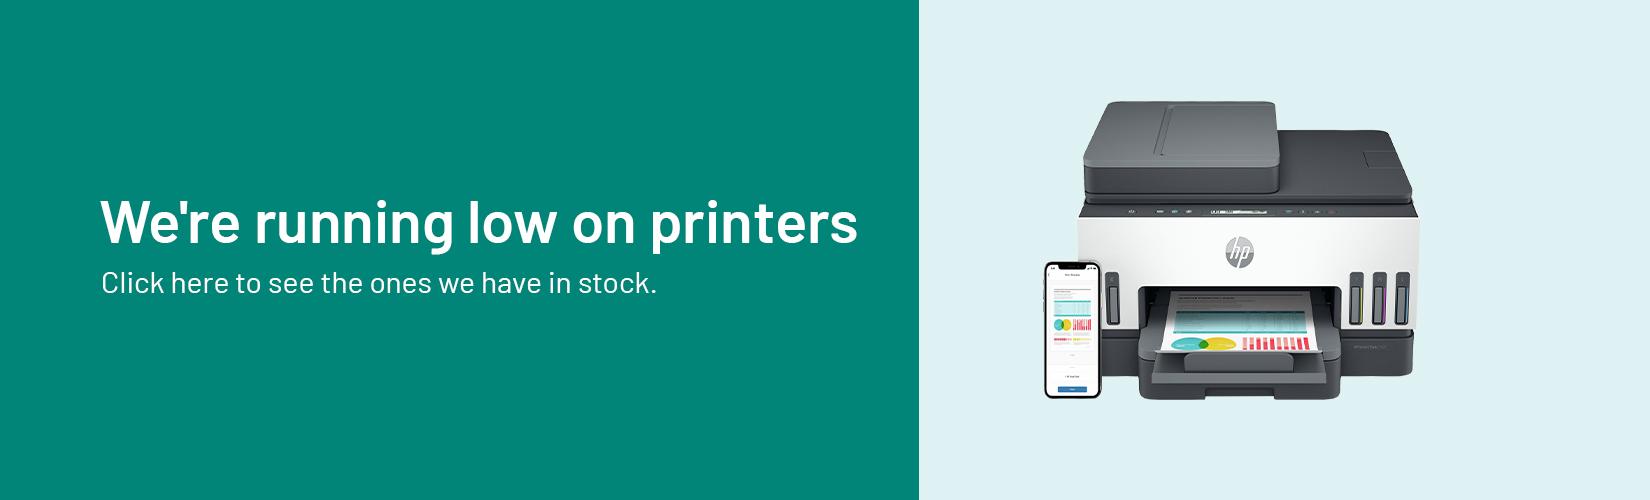 We're running low on printers. Click here to see the ones we have in stock.